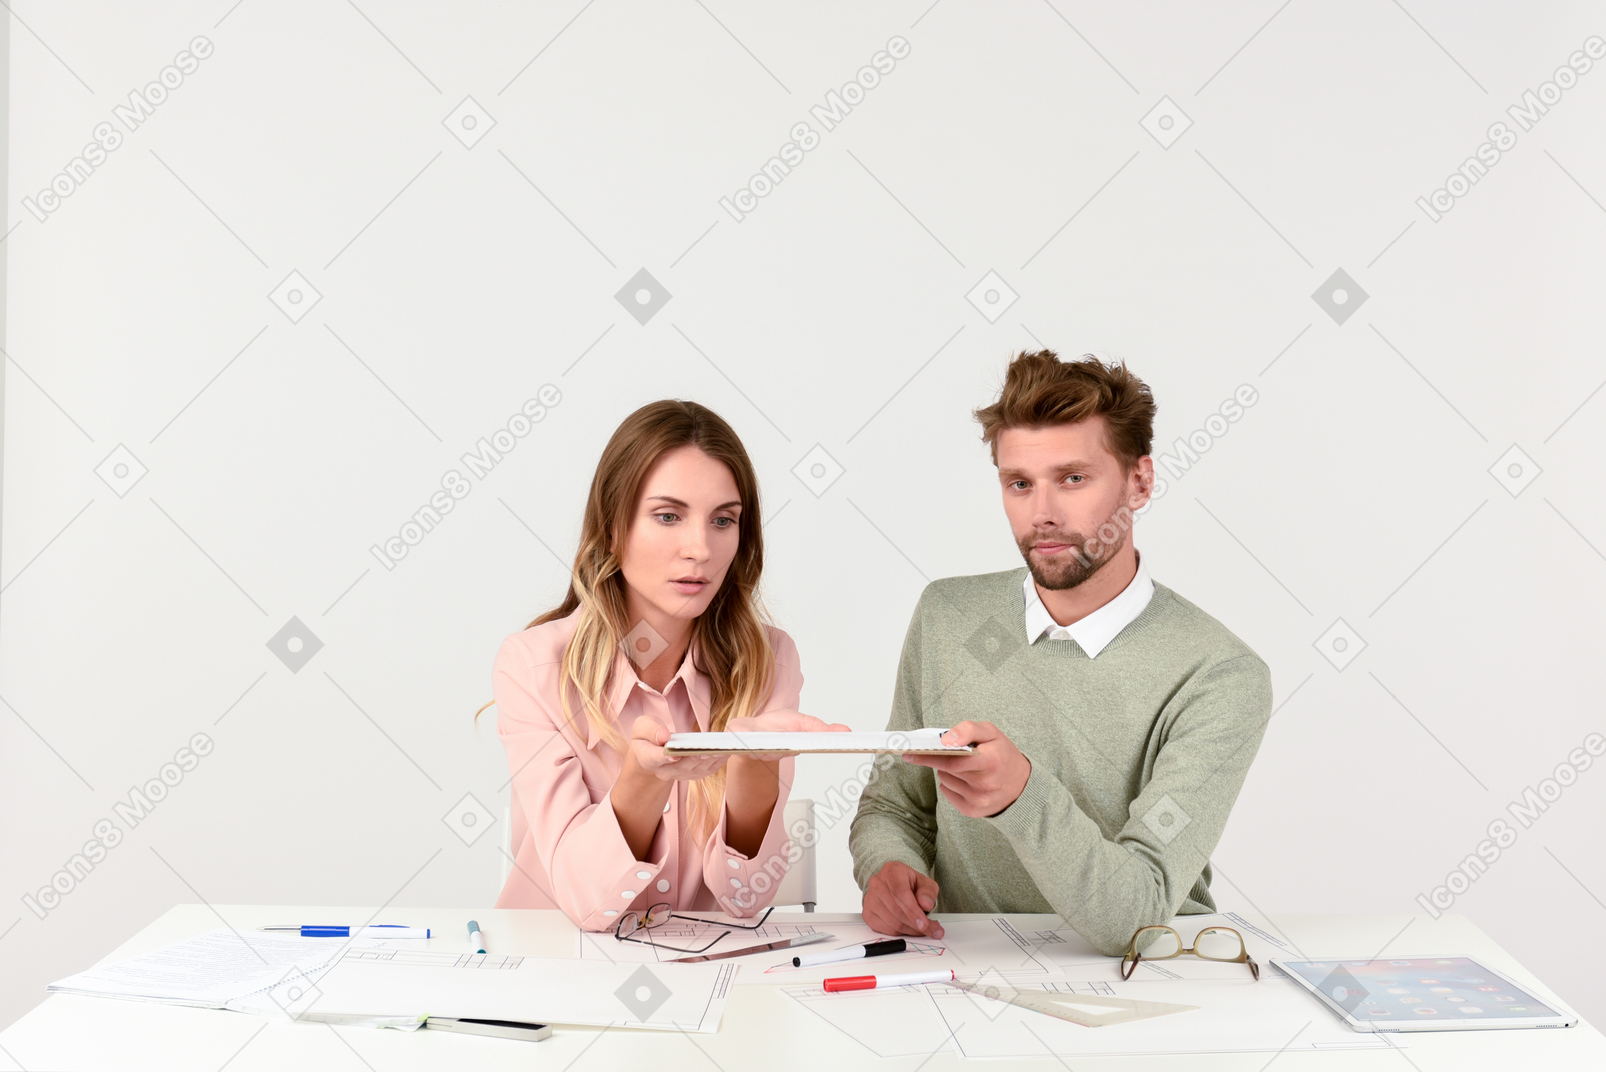 Architects sitting at the tablet and holding tablet